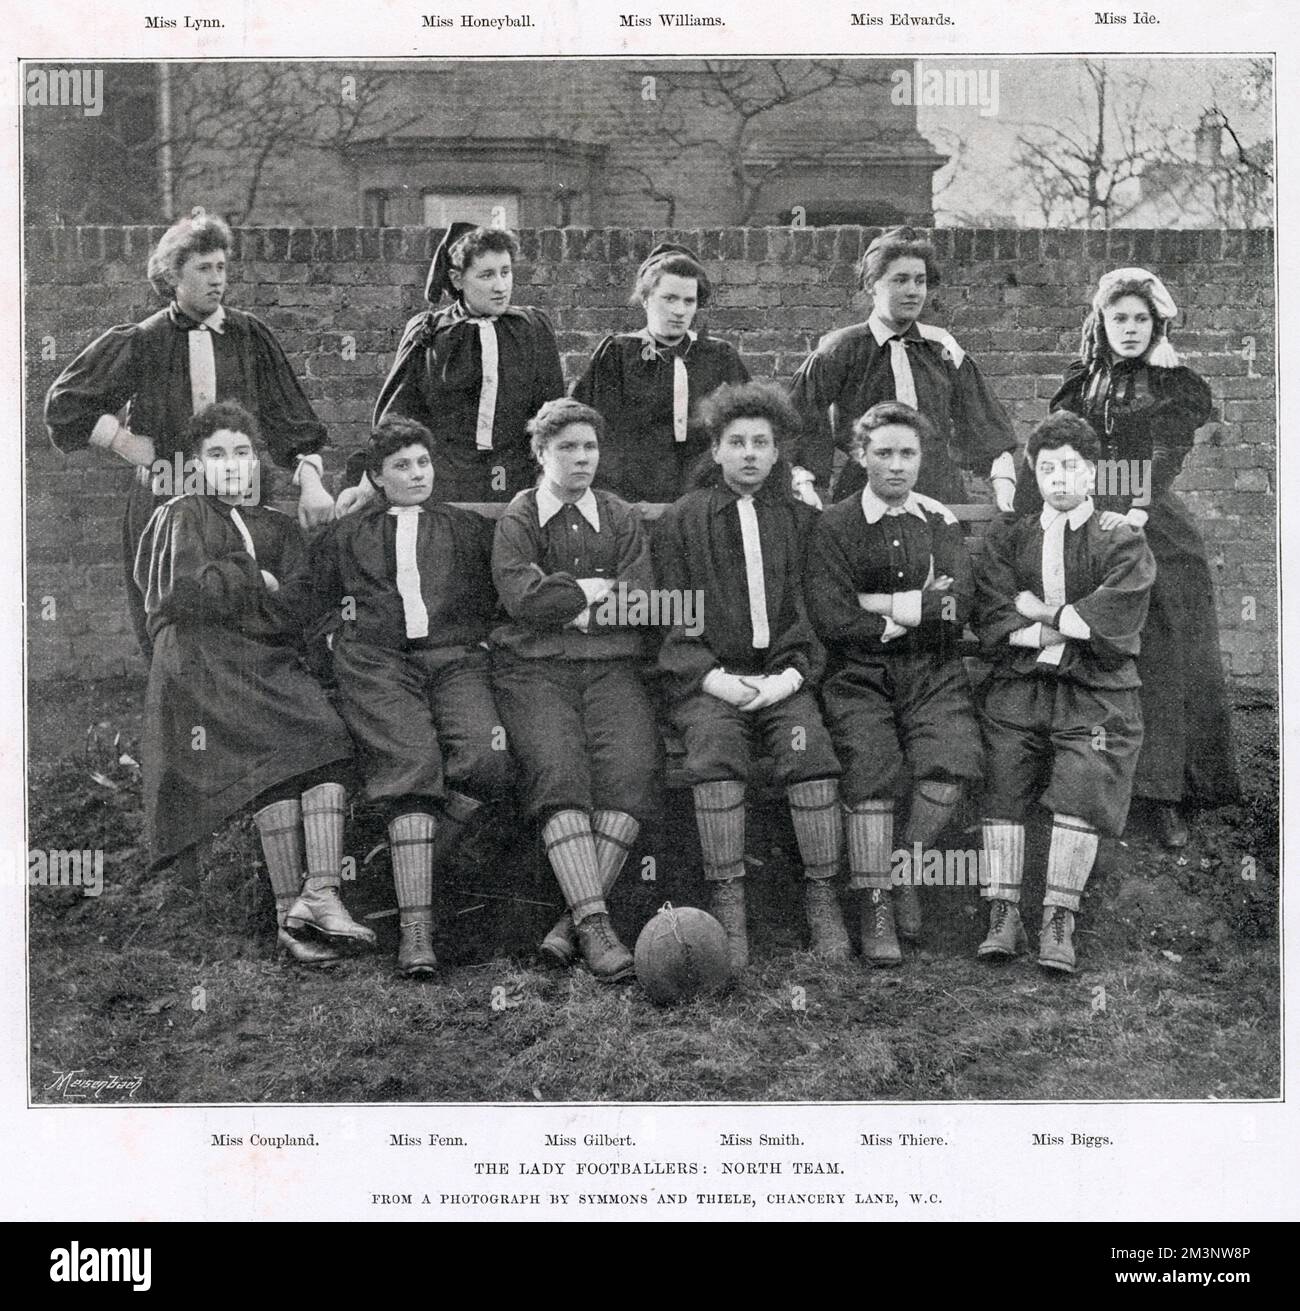 The North Team, representing North London, who played the opening match of the British Ladies Football Club to a crowd of 10,000 at Nightingale Lane Ground, Crouch End. Back row from left to right: Miss Lynn, Miss Nettie J. Honeyball(Captain), Miss Williams, Miss Edwards, Miss Ide. Front row from from left to right: Miss Coupland, Miss Fenn, Miss Gilbert, Miss Smith, Miss Thiere, Miss Biggs. Miss Ide appears in conventional attire, while the other ladies are dressed for the game. Stock Photo